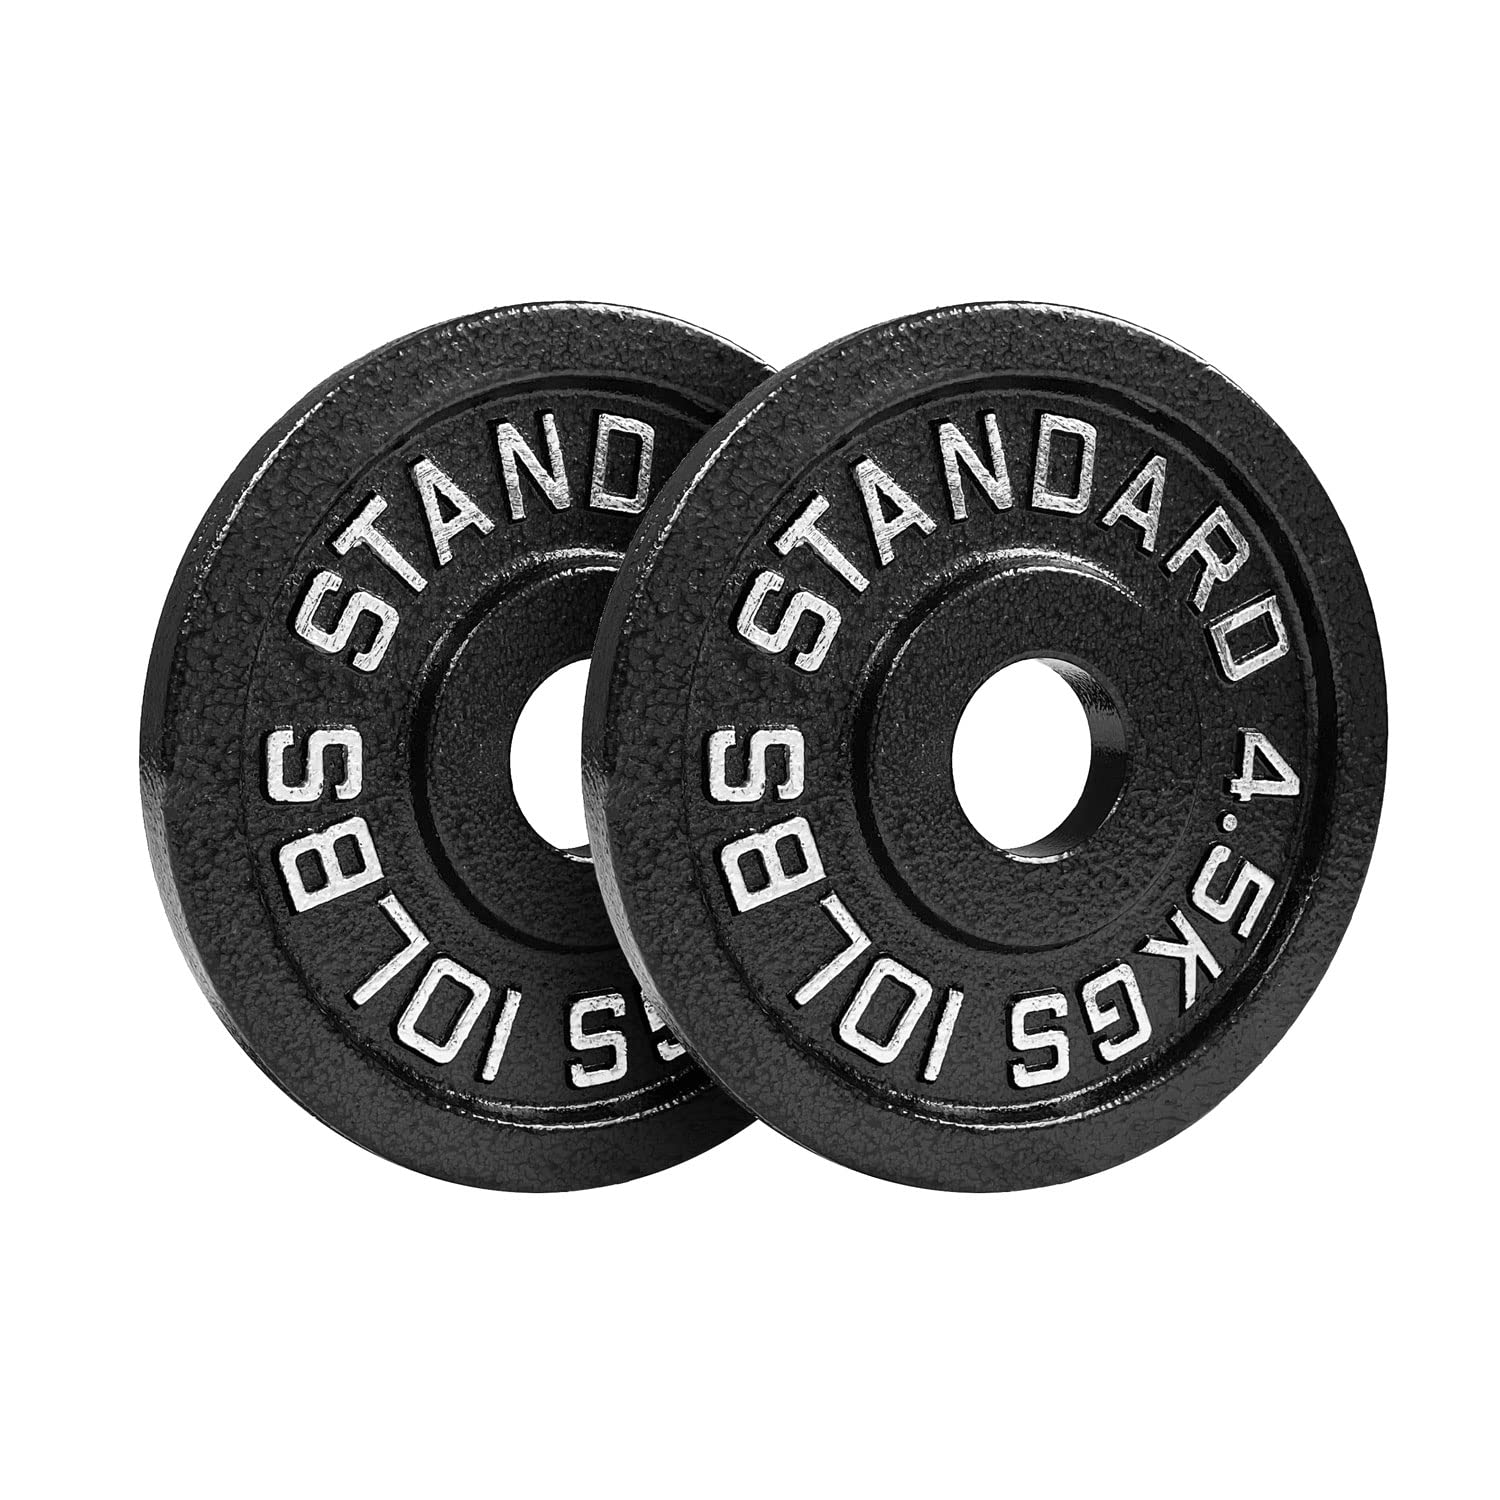 Steel Weight Plates 85LB Set - Olympic 2 inch Center Premium Coating 2x 25lb, 10lb, 5lb, and 2.5lb for Olympic Weight Lifting Barbells